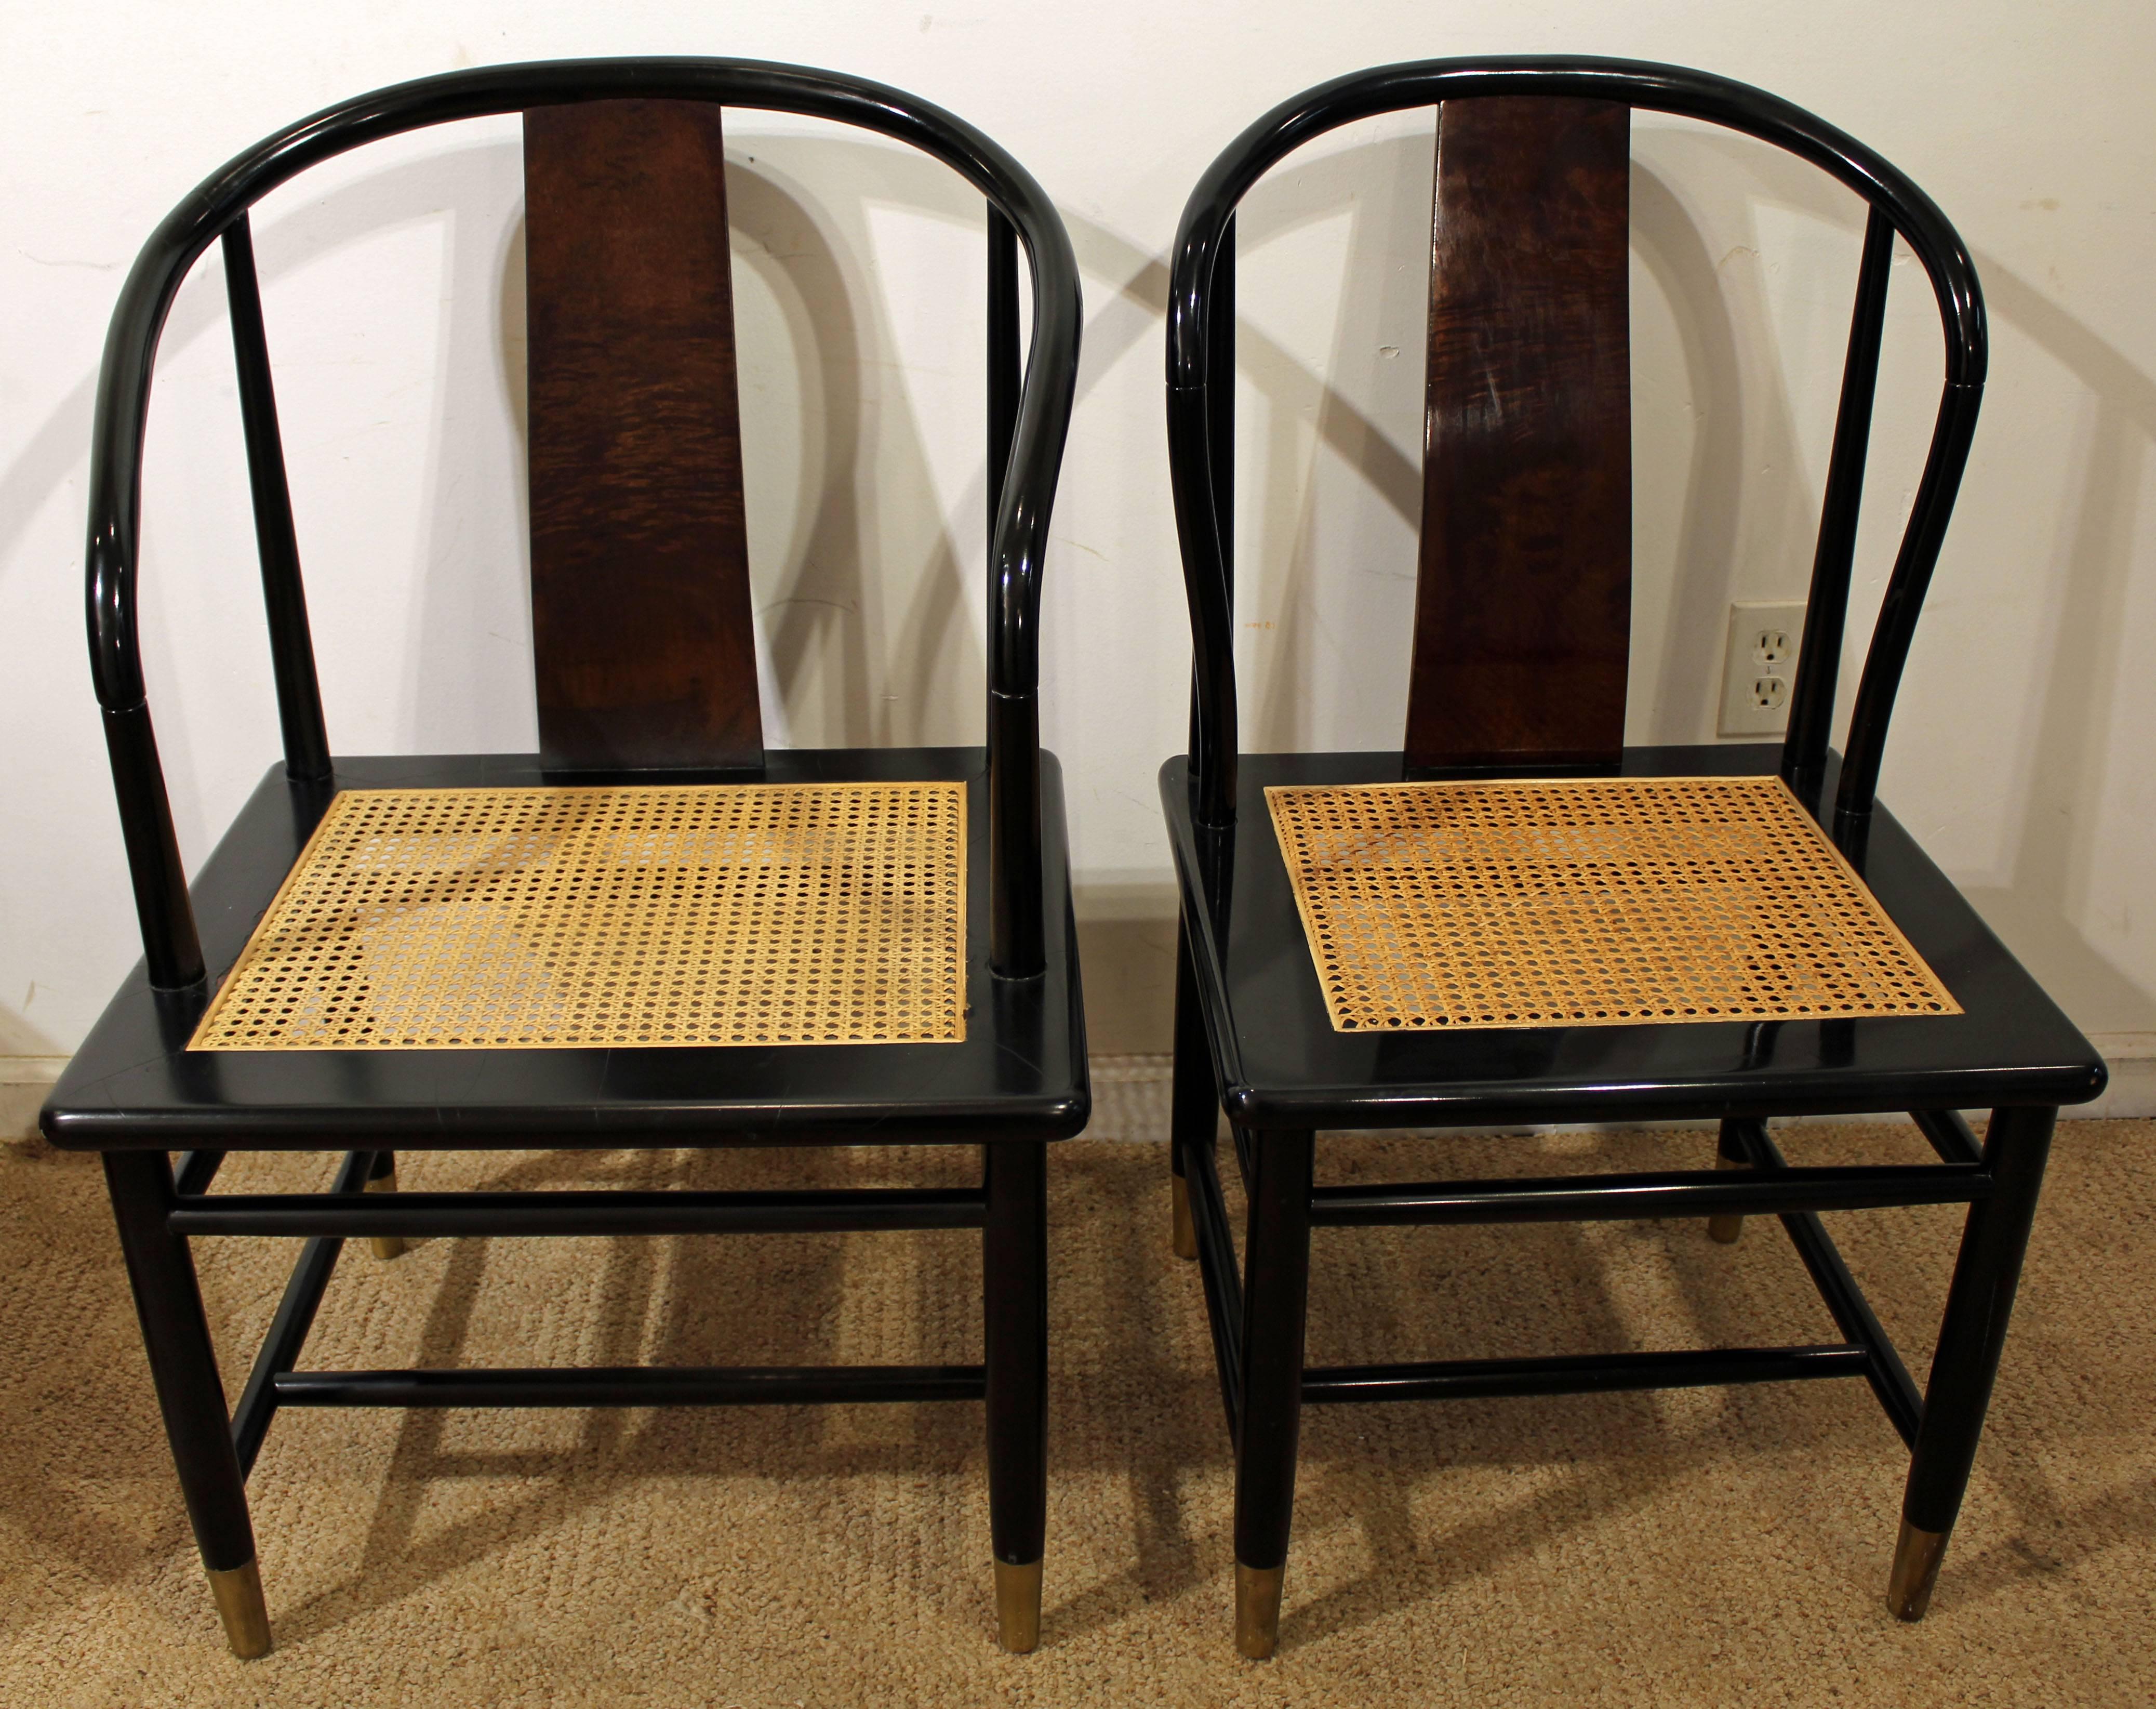 Offered is a set of eight midcentury Asian dining chairs designed by Leona Herman for Henredon. They feature black lacquer frames with lacquered burl wood backs, brass feet, and caned seats. Includes two armchair and six side chairs. They are signed